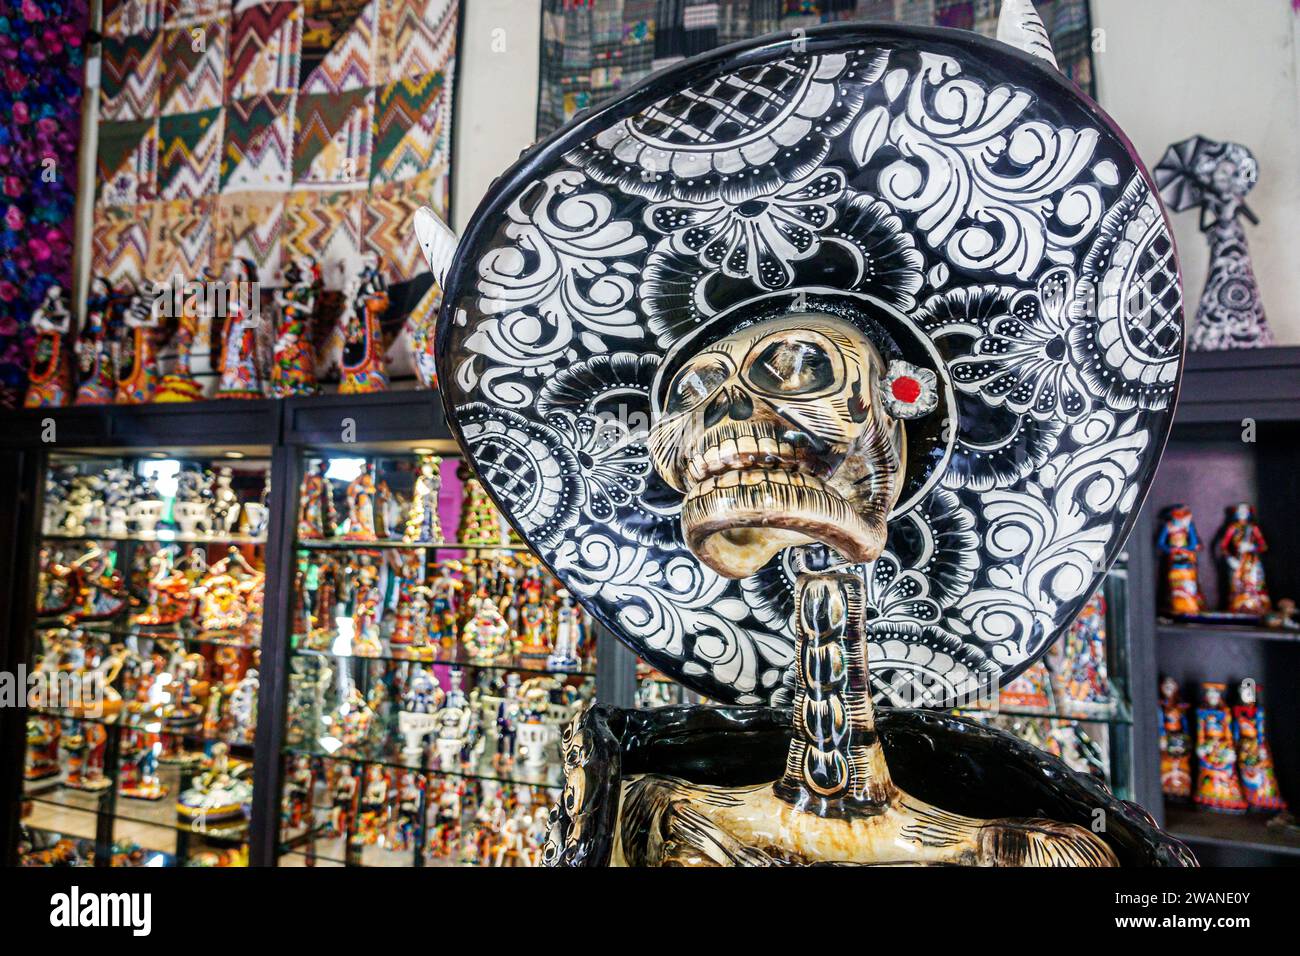 Merida Mexico,centro historico central historic district,La Catrina Day of Dead skeleton,gifts souvenirs,art collective gallery Mayan made artisans,in Stock Photo